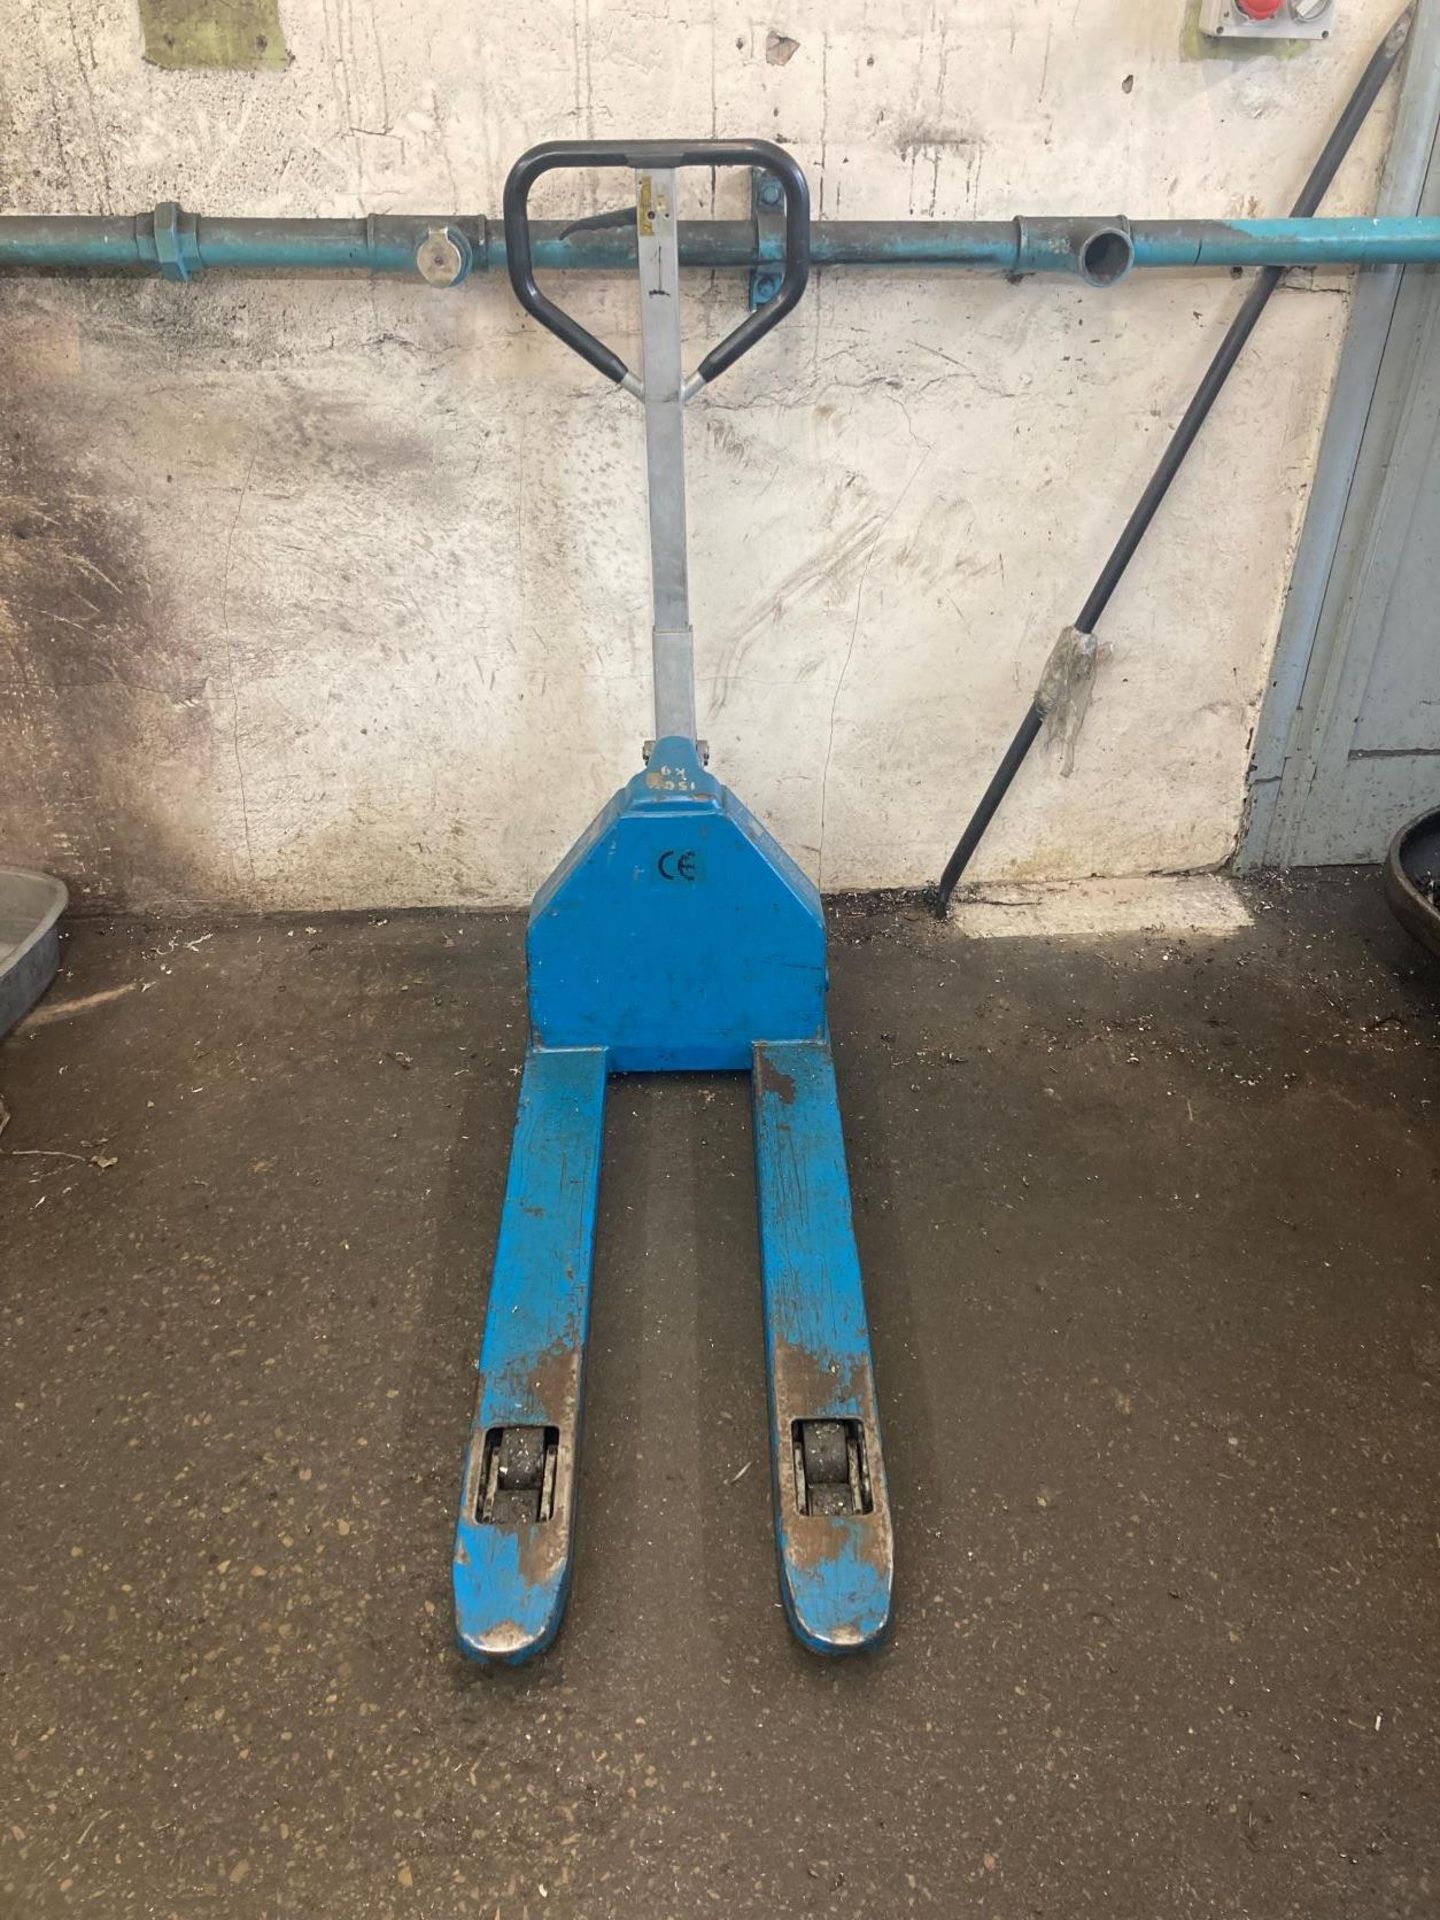 PFAFF 1500kg PALLET TRUCK (BLUE) ** PLEASE NOTE THESE ITEMS ARE LOCATED IN STOCKPORT & WILL